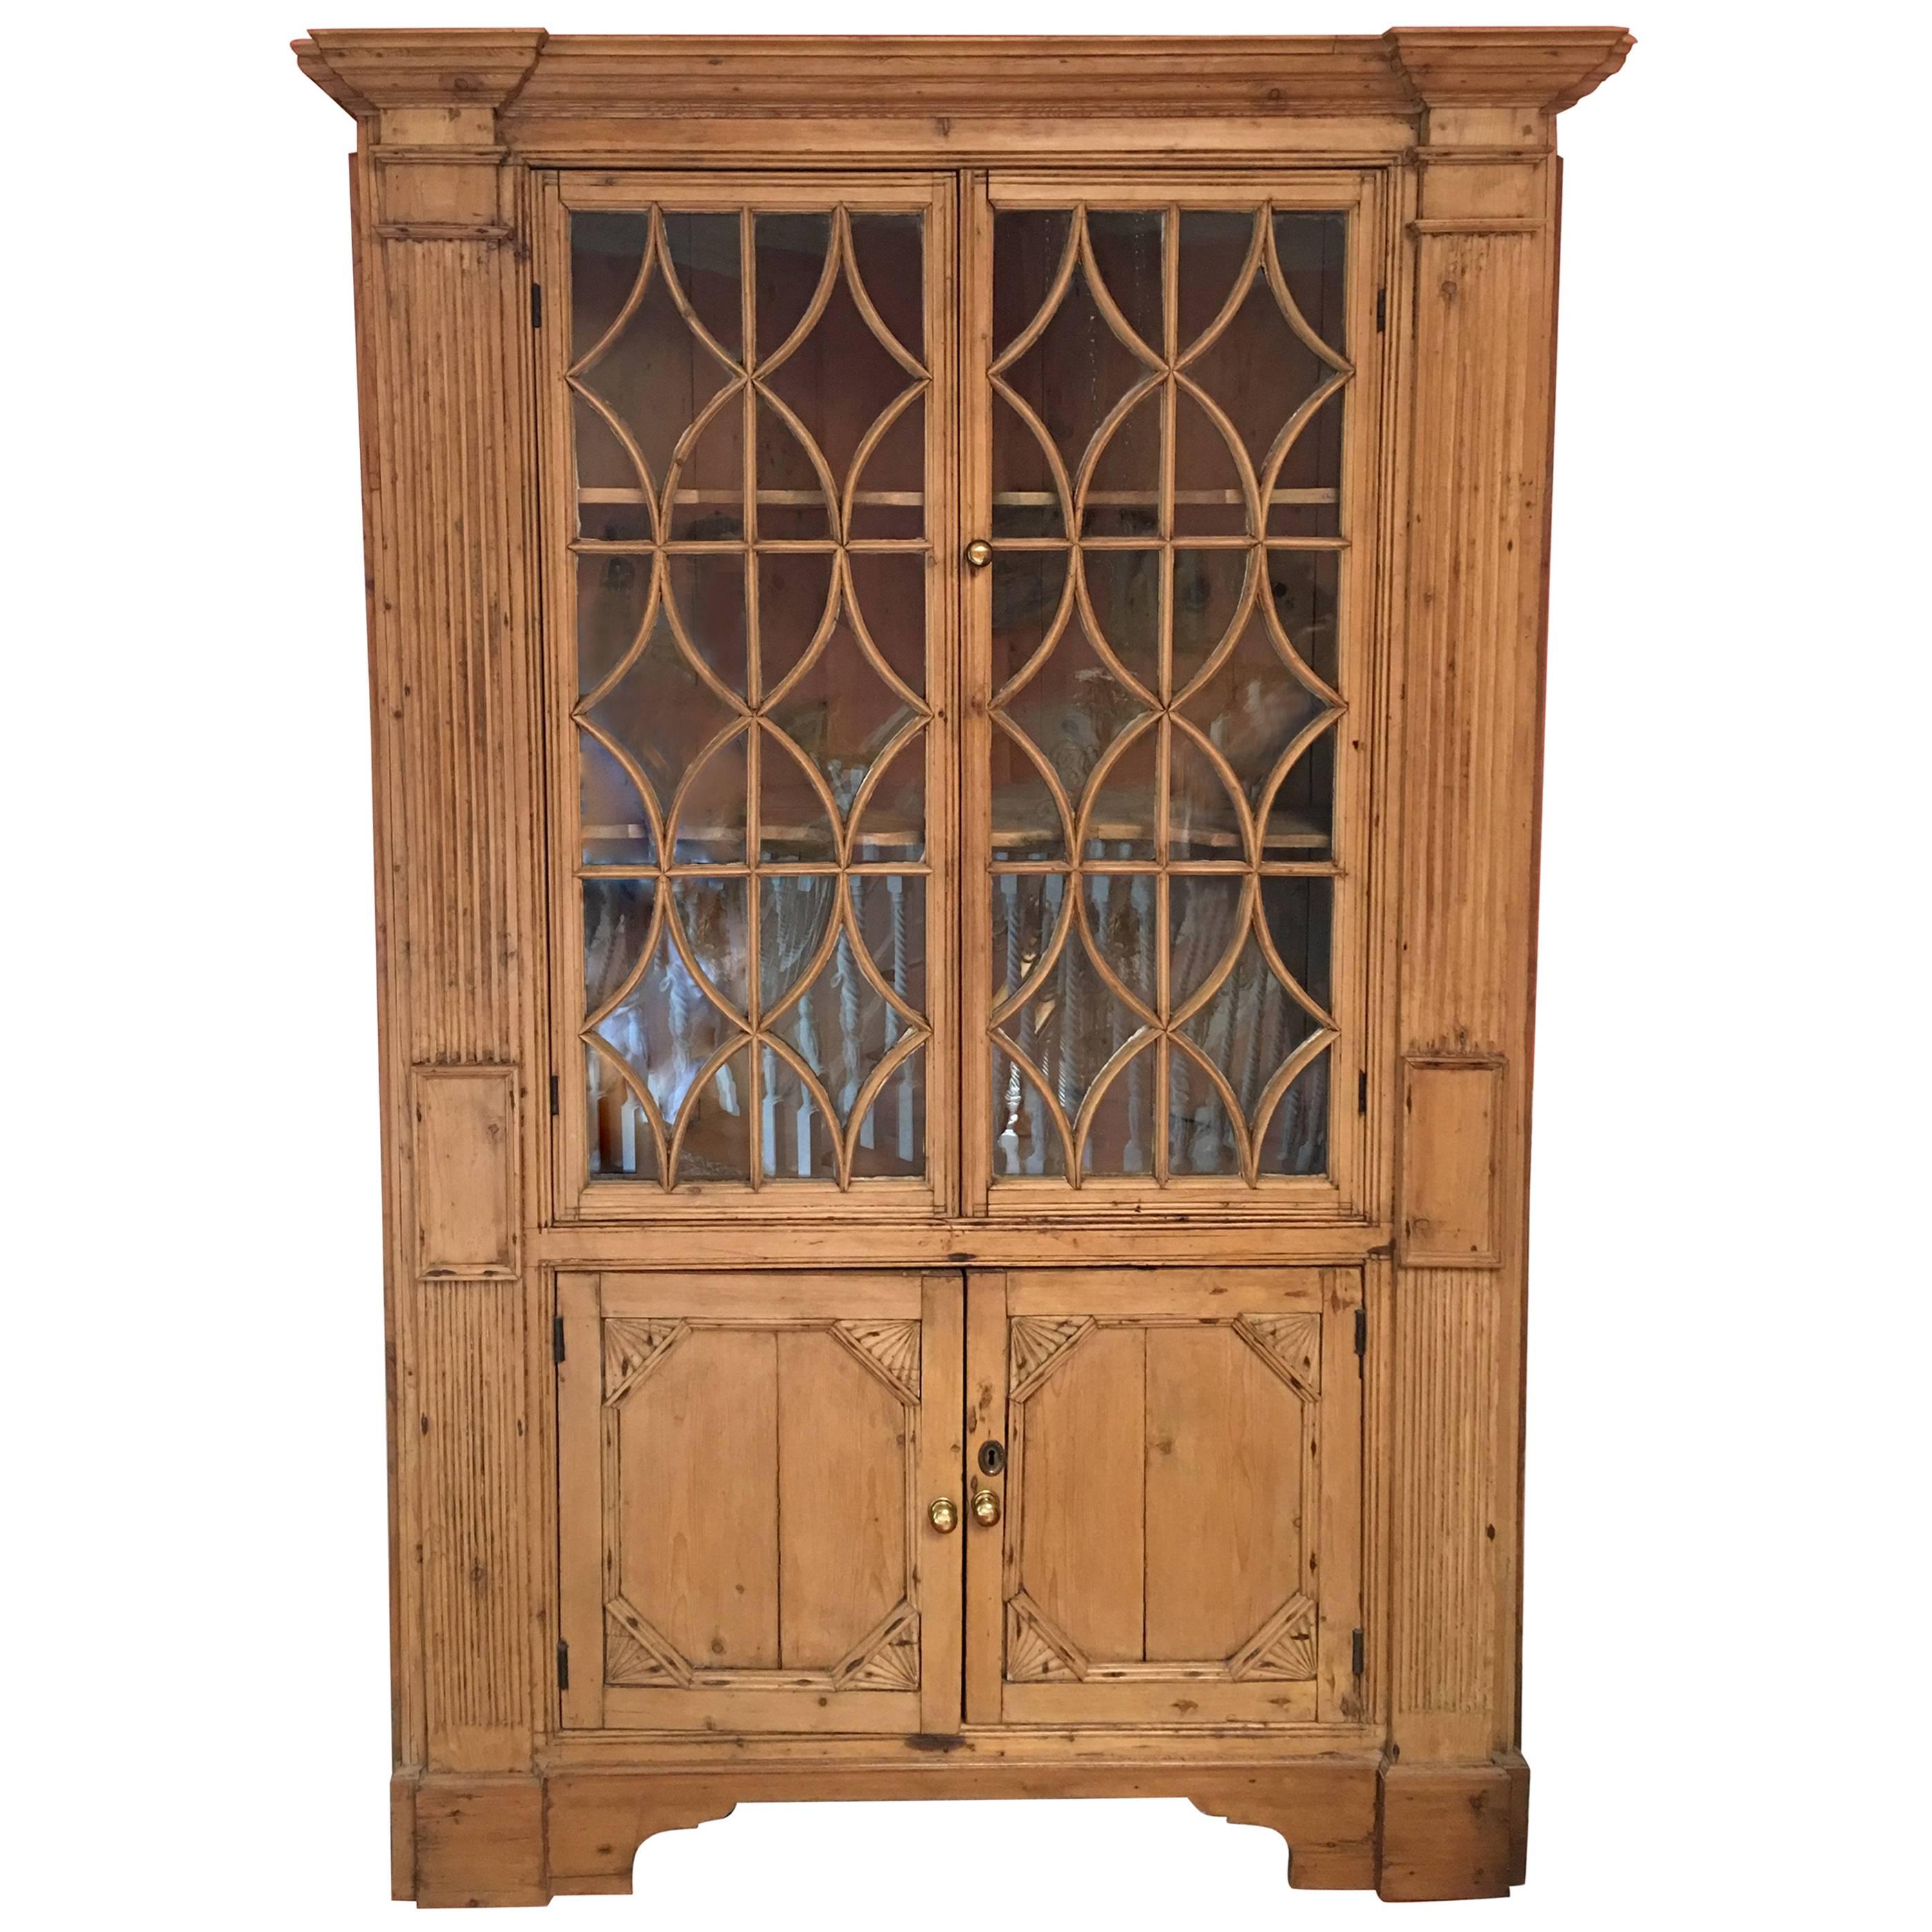 American Pine Corner Cupboard or Cabinet with Glass Doors, 19th Century